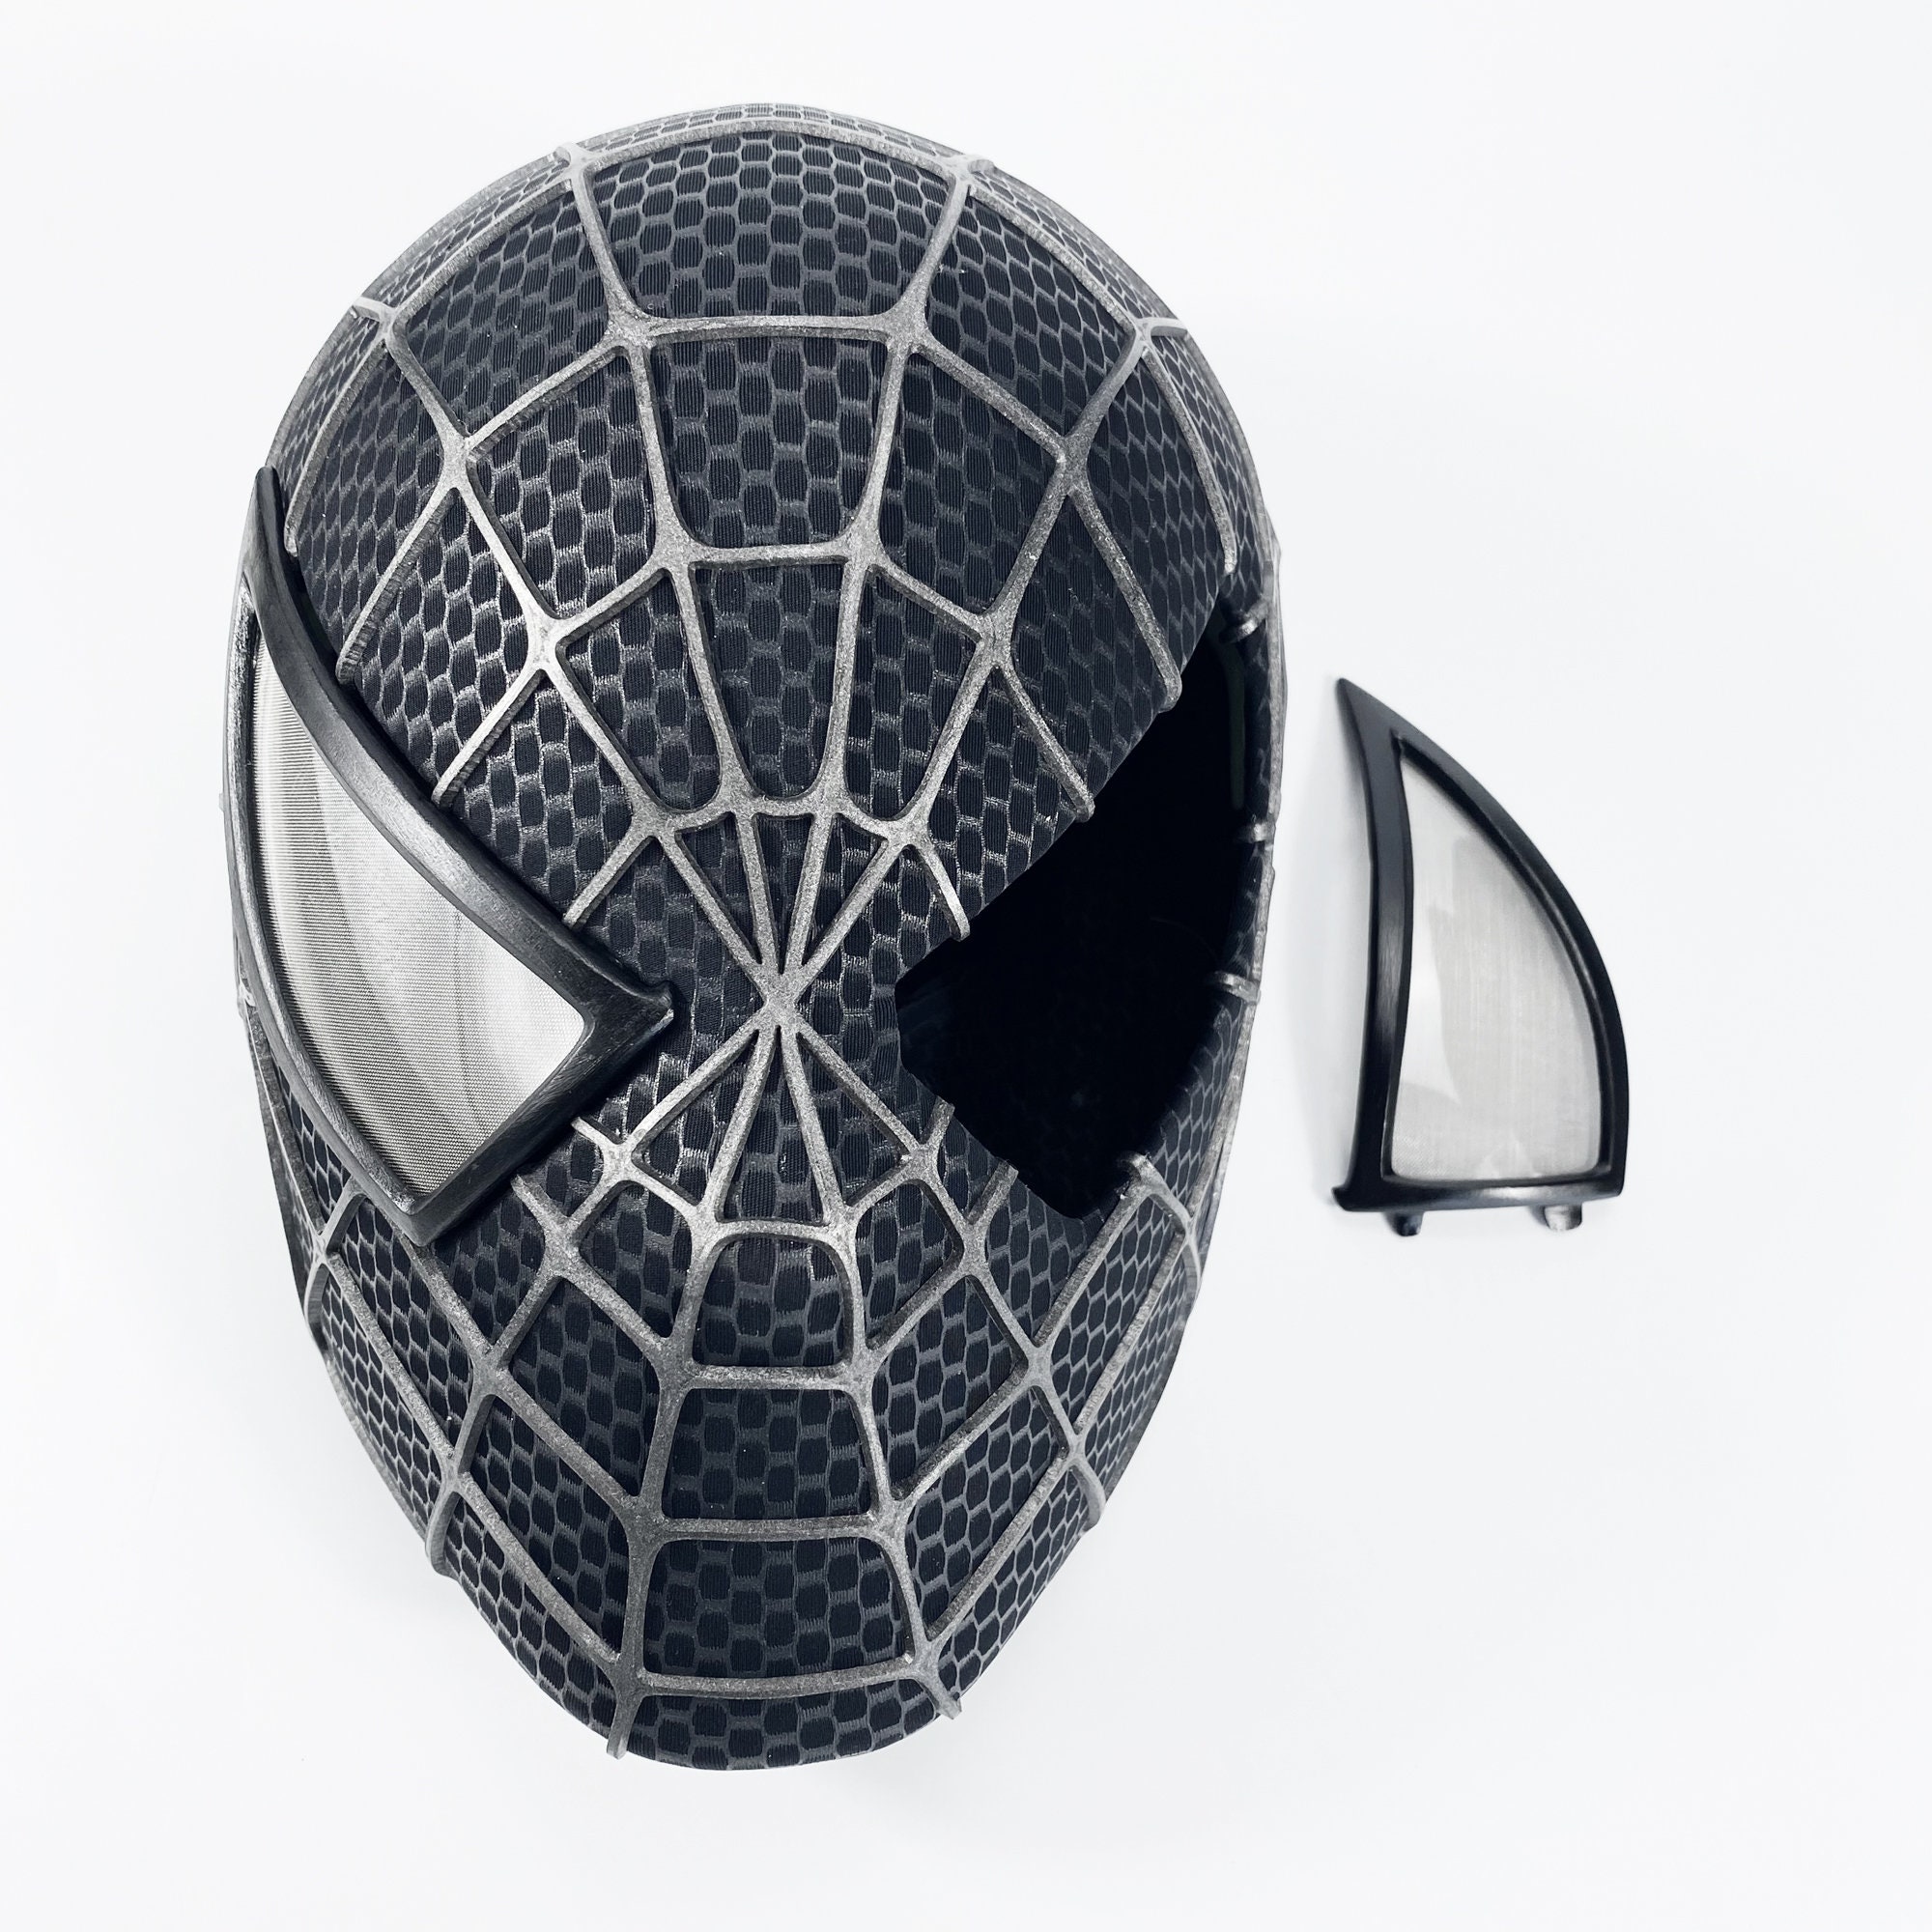 Black Spiderman Mask Cosplay Sam Raimi Spiderman Mask Adults With Faceshell  & 3D Rubber Web, Wearable Movie Prop Replica 